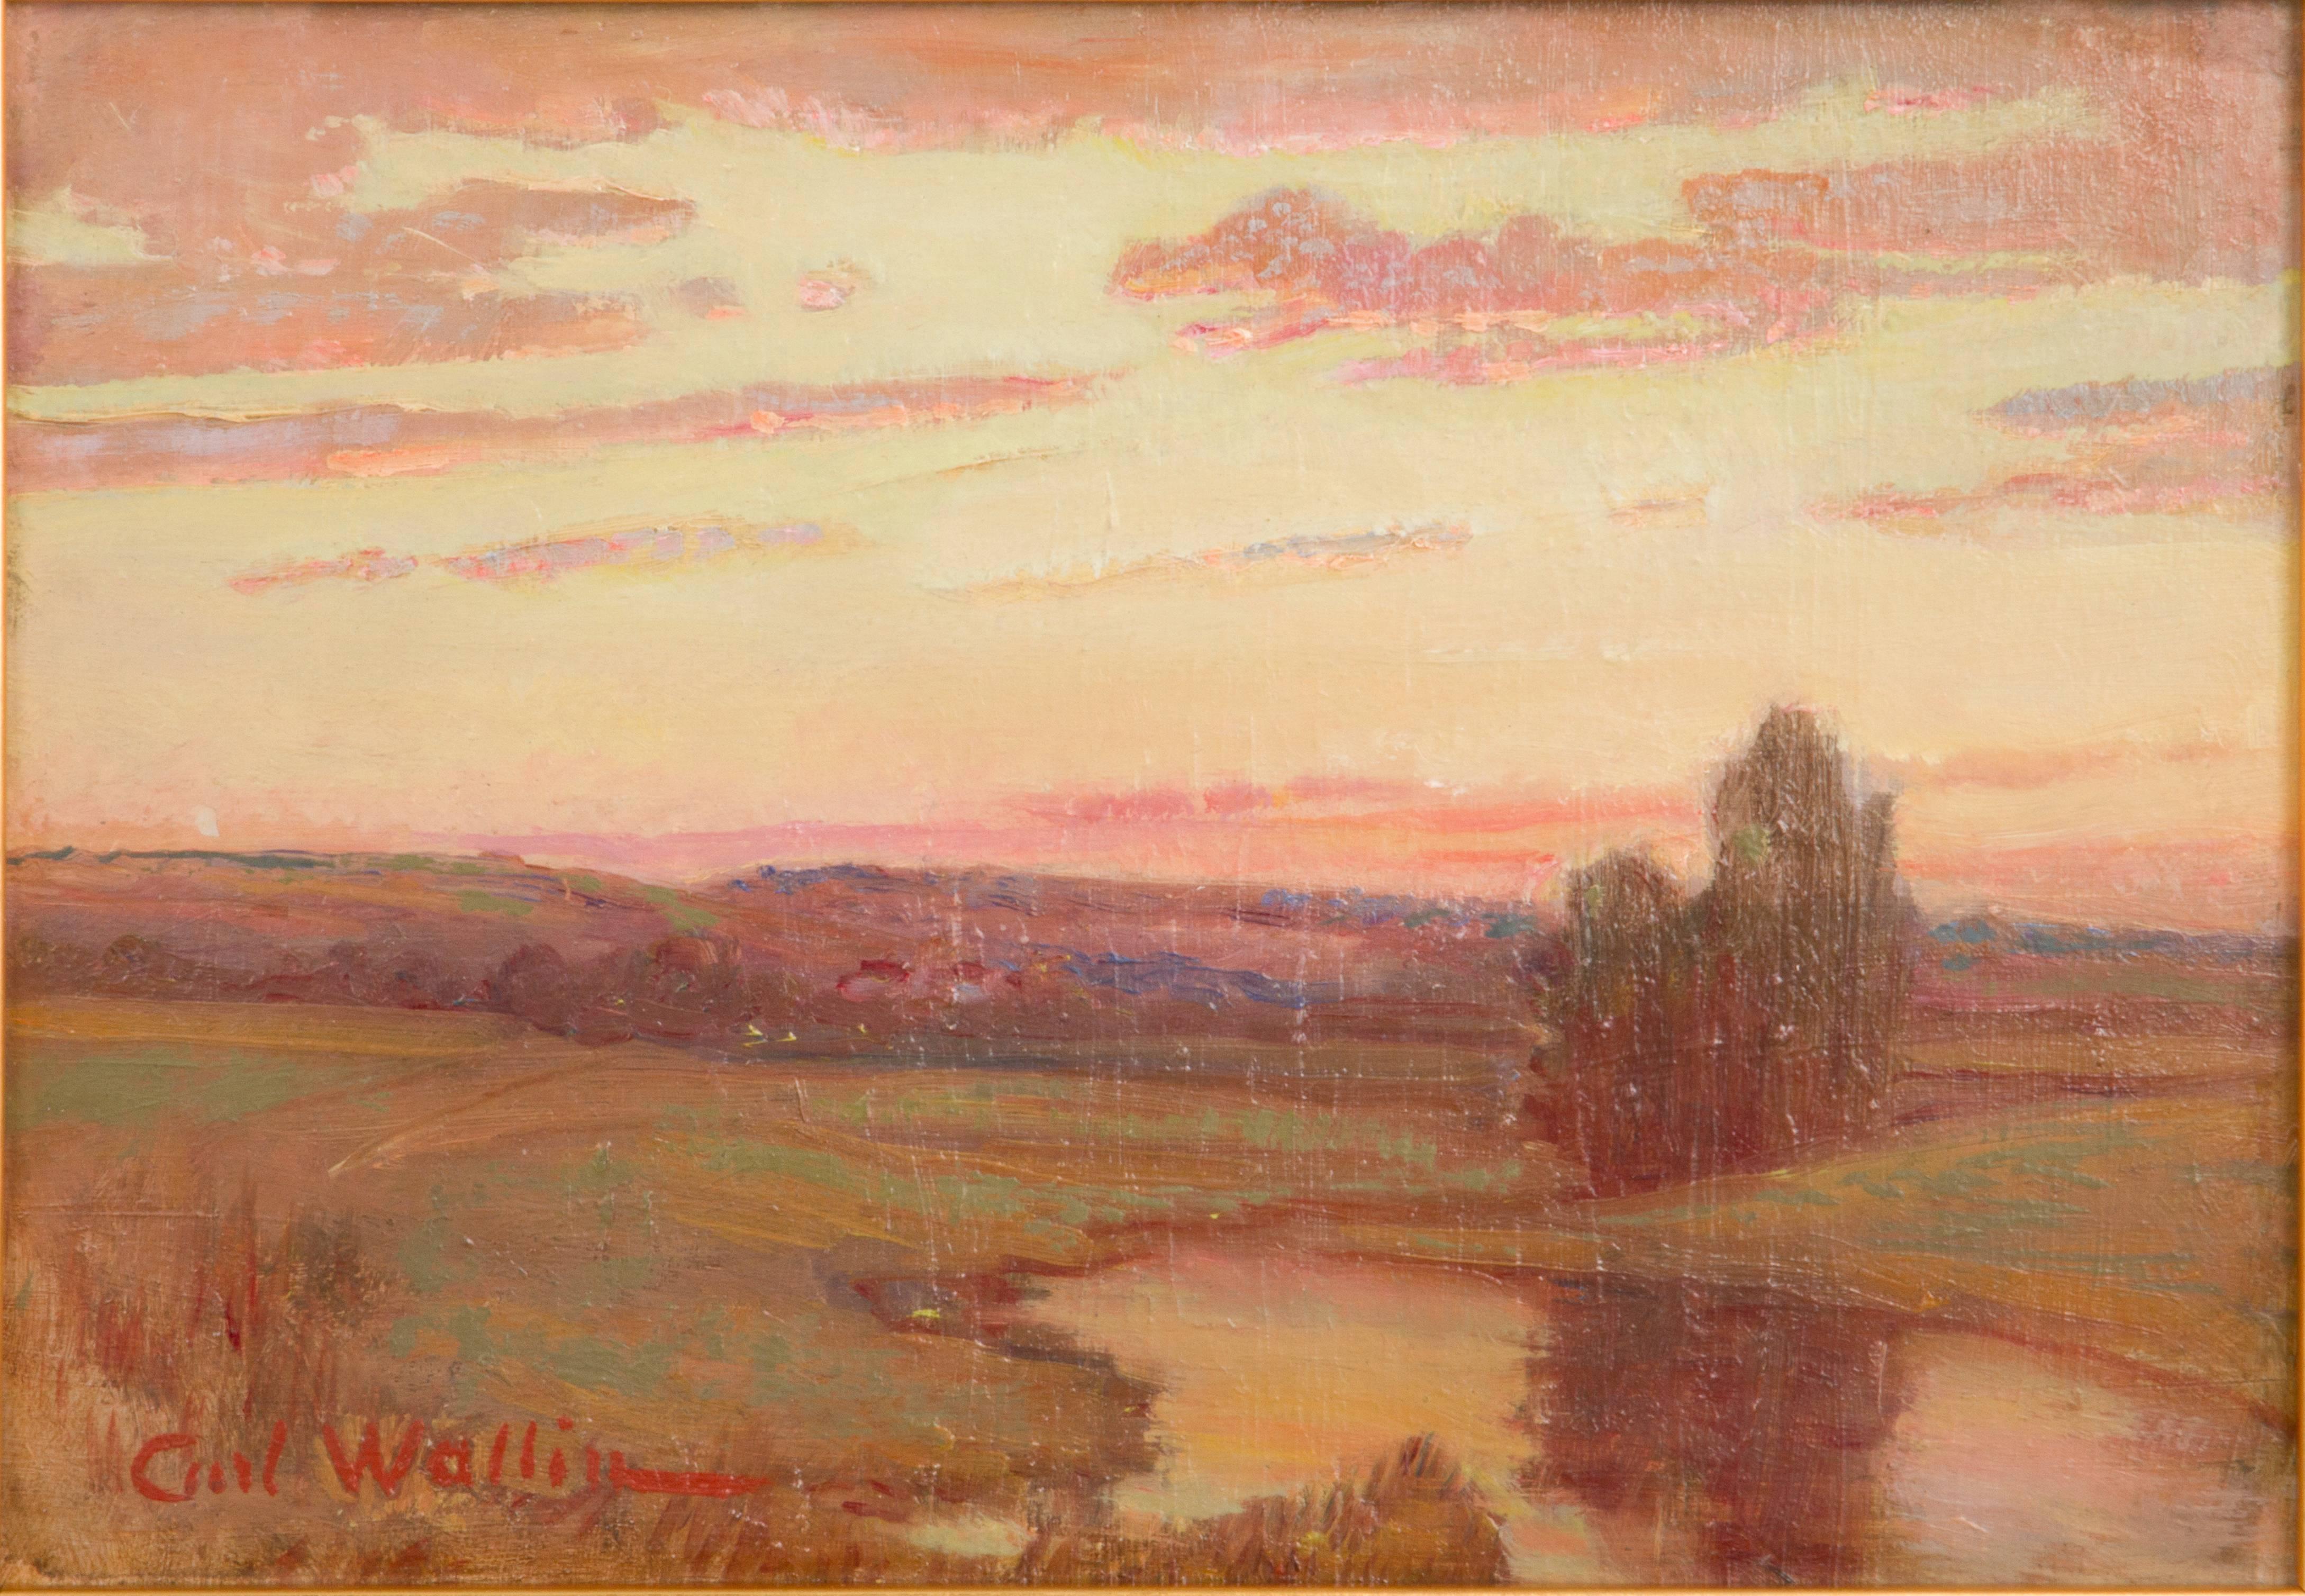 Wallin was a Swedish American painter living in Chicago. His early work was more traditional and later he became more of a symbolist. This is a wonderful painting capturing the light of pre-dusk.